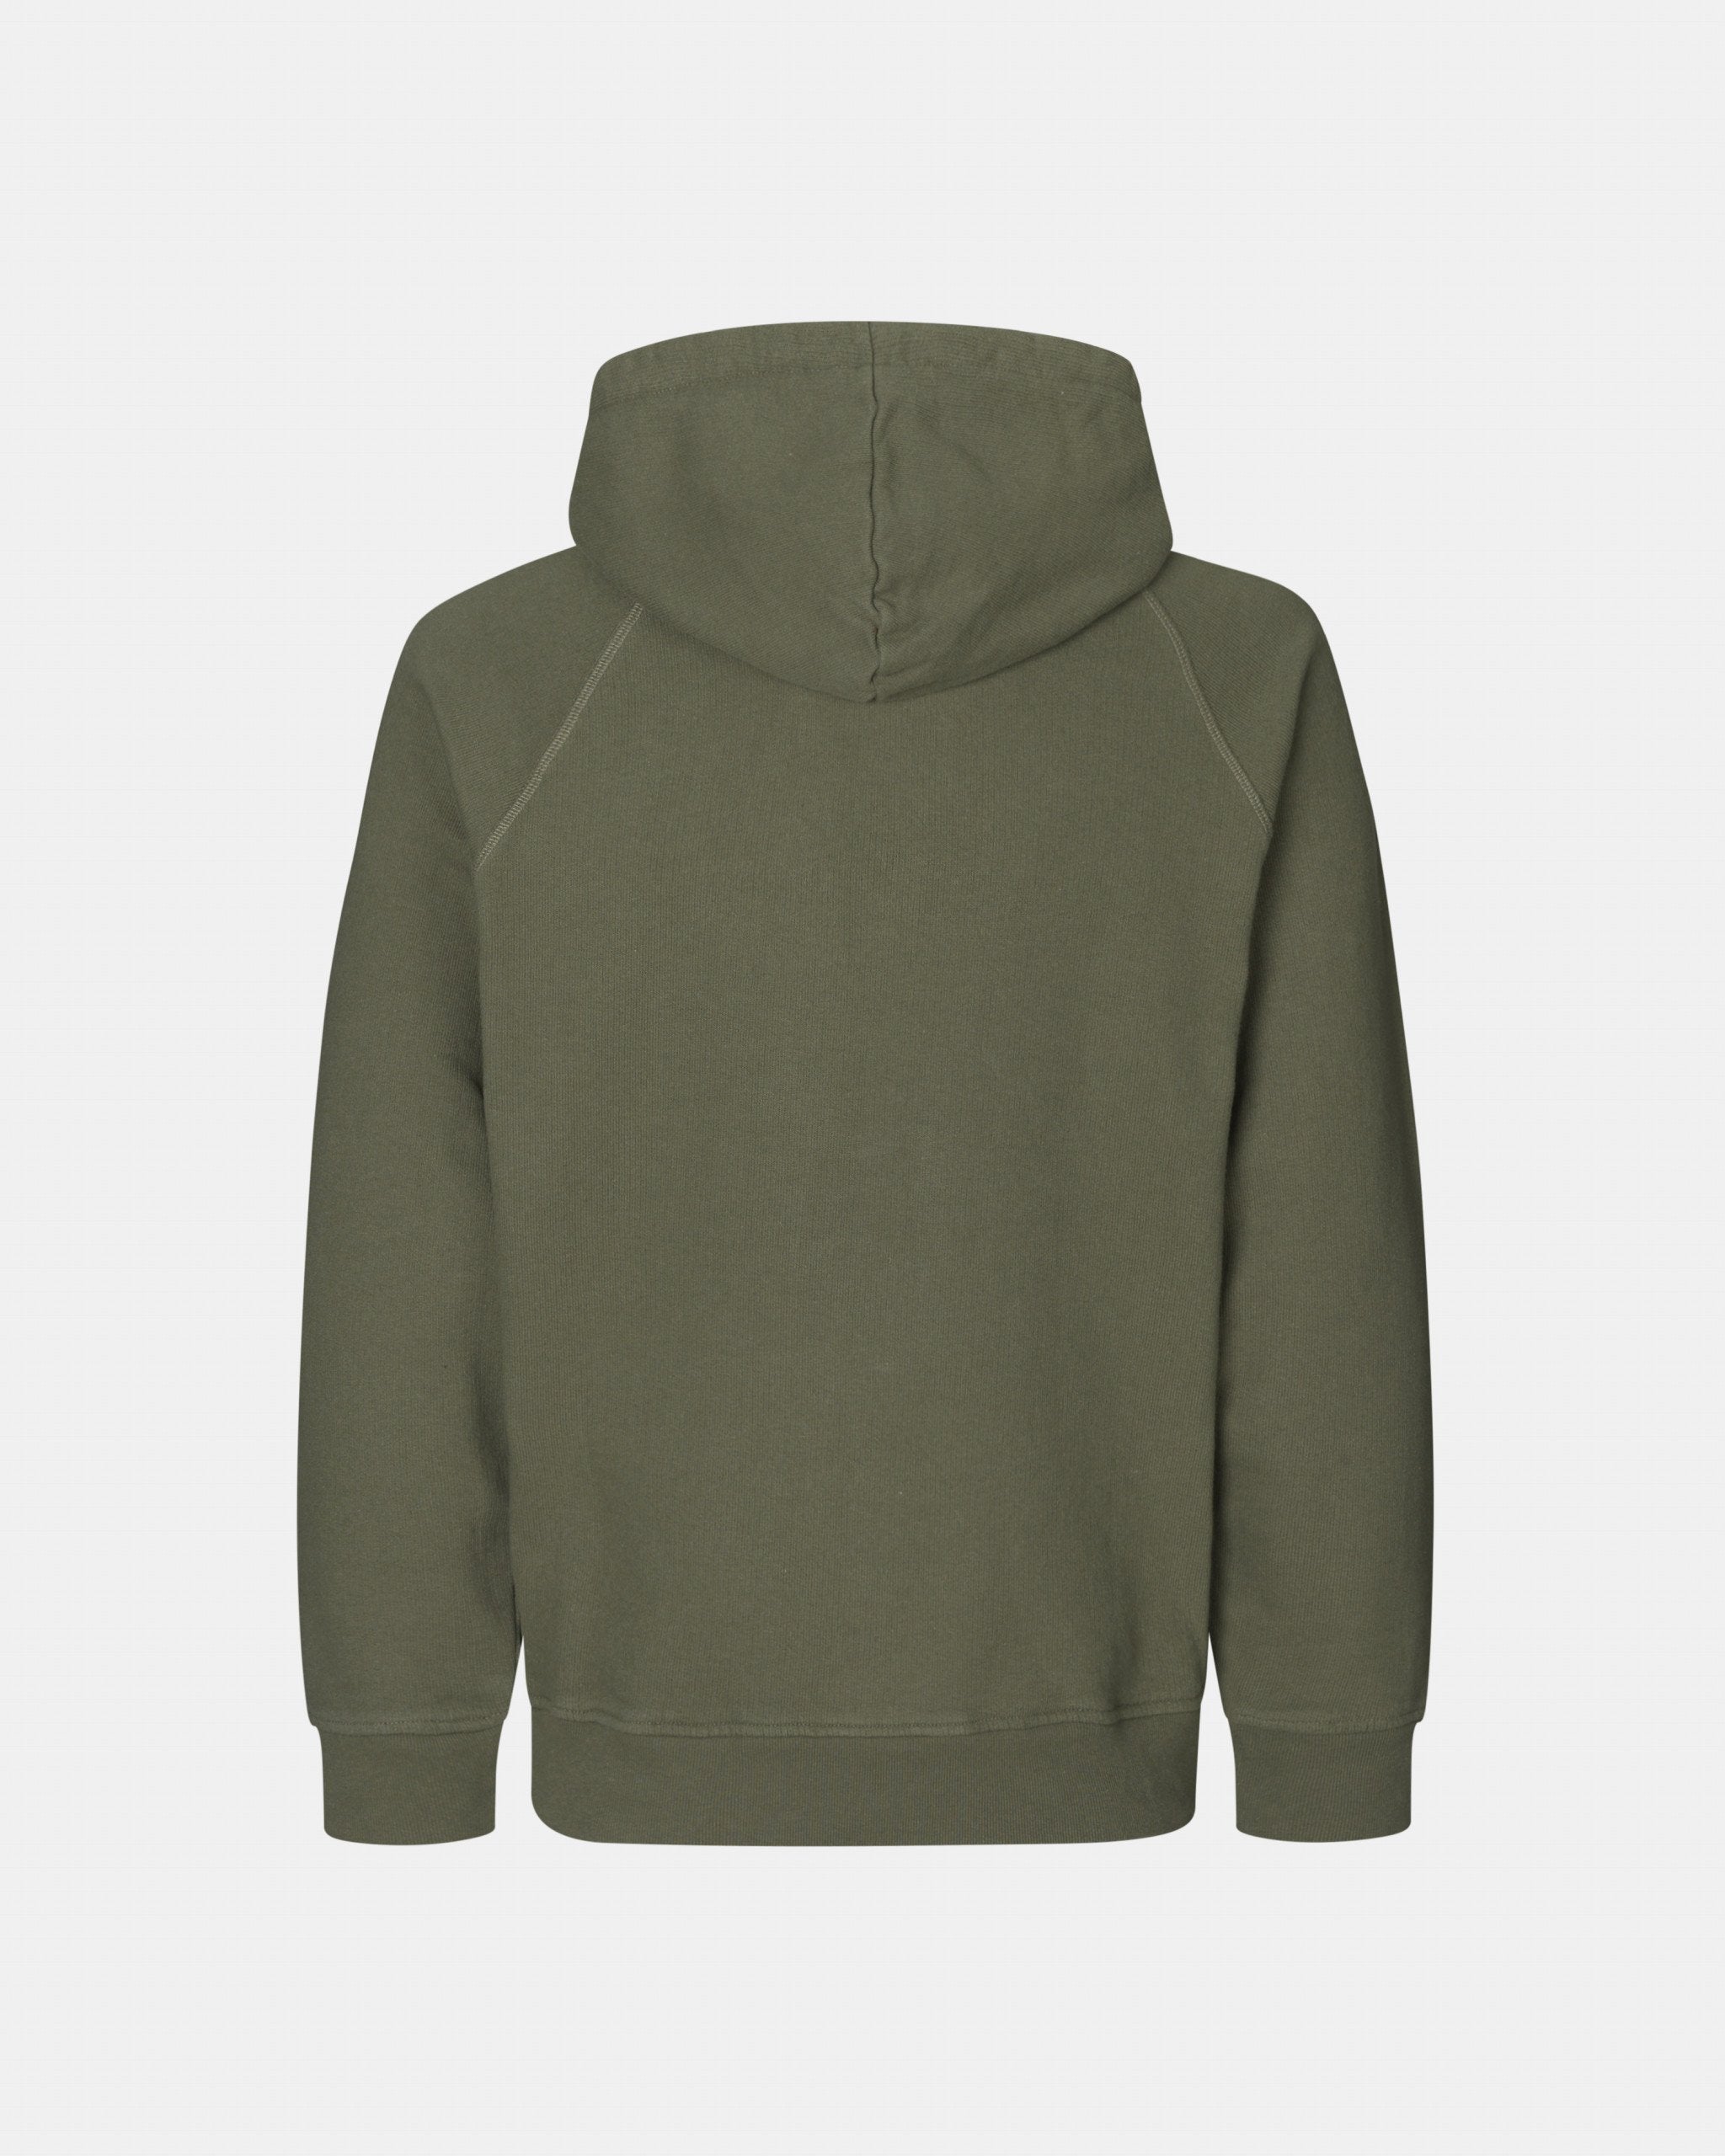 PAS NORMAL STUDIOS Off-Race Patch Hoodie - Dusty Olive